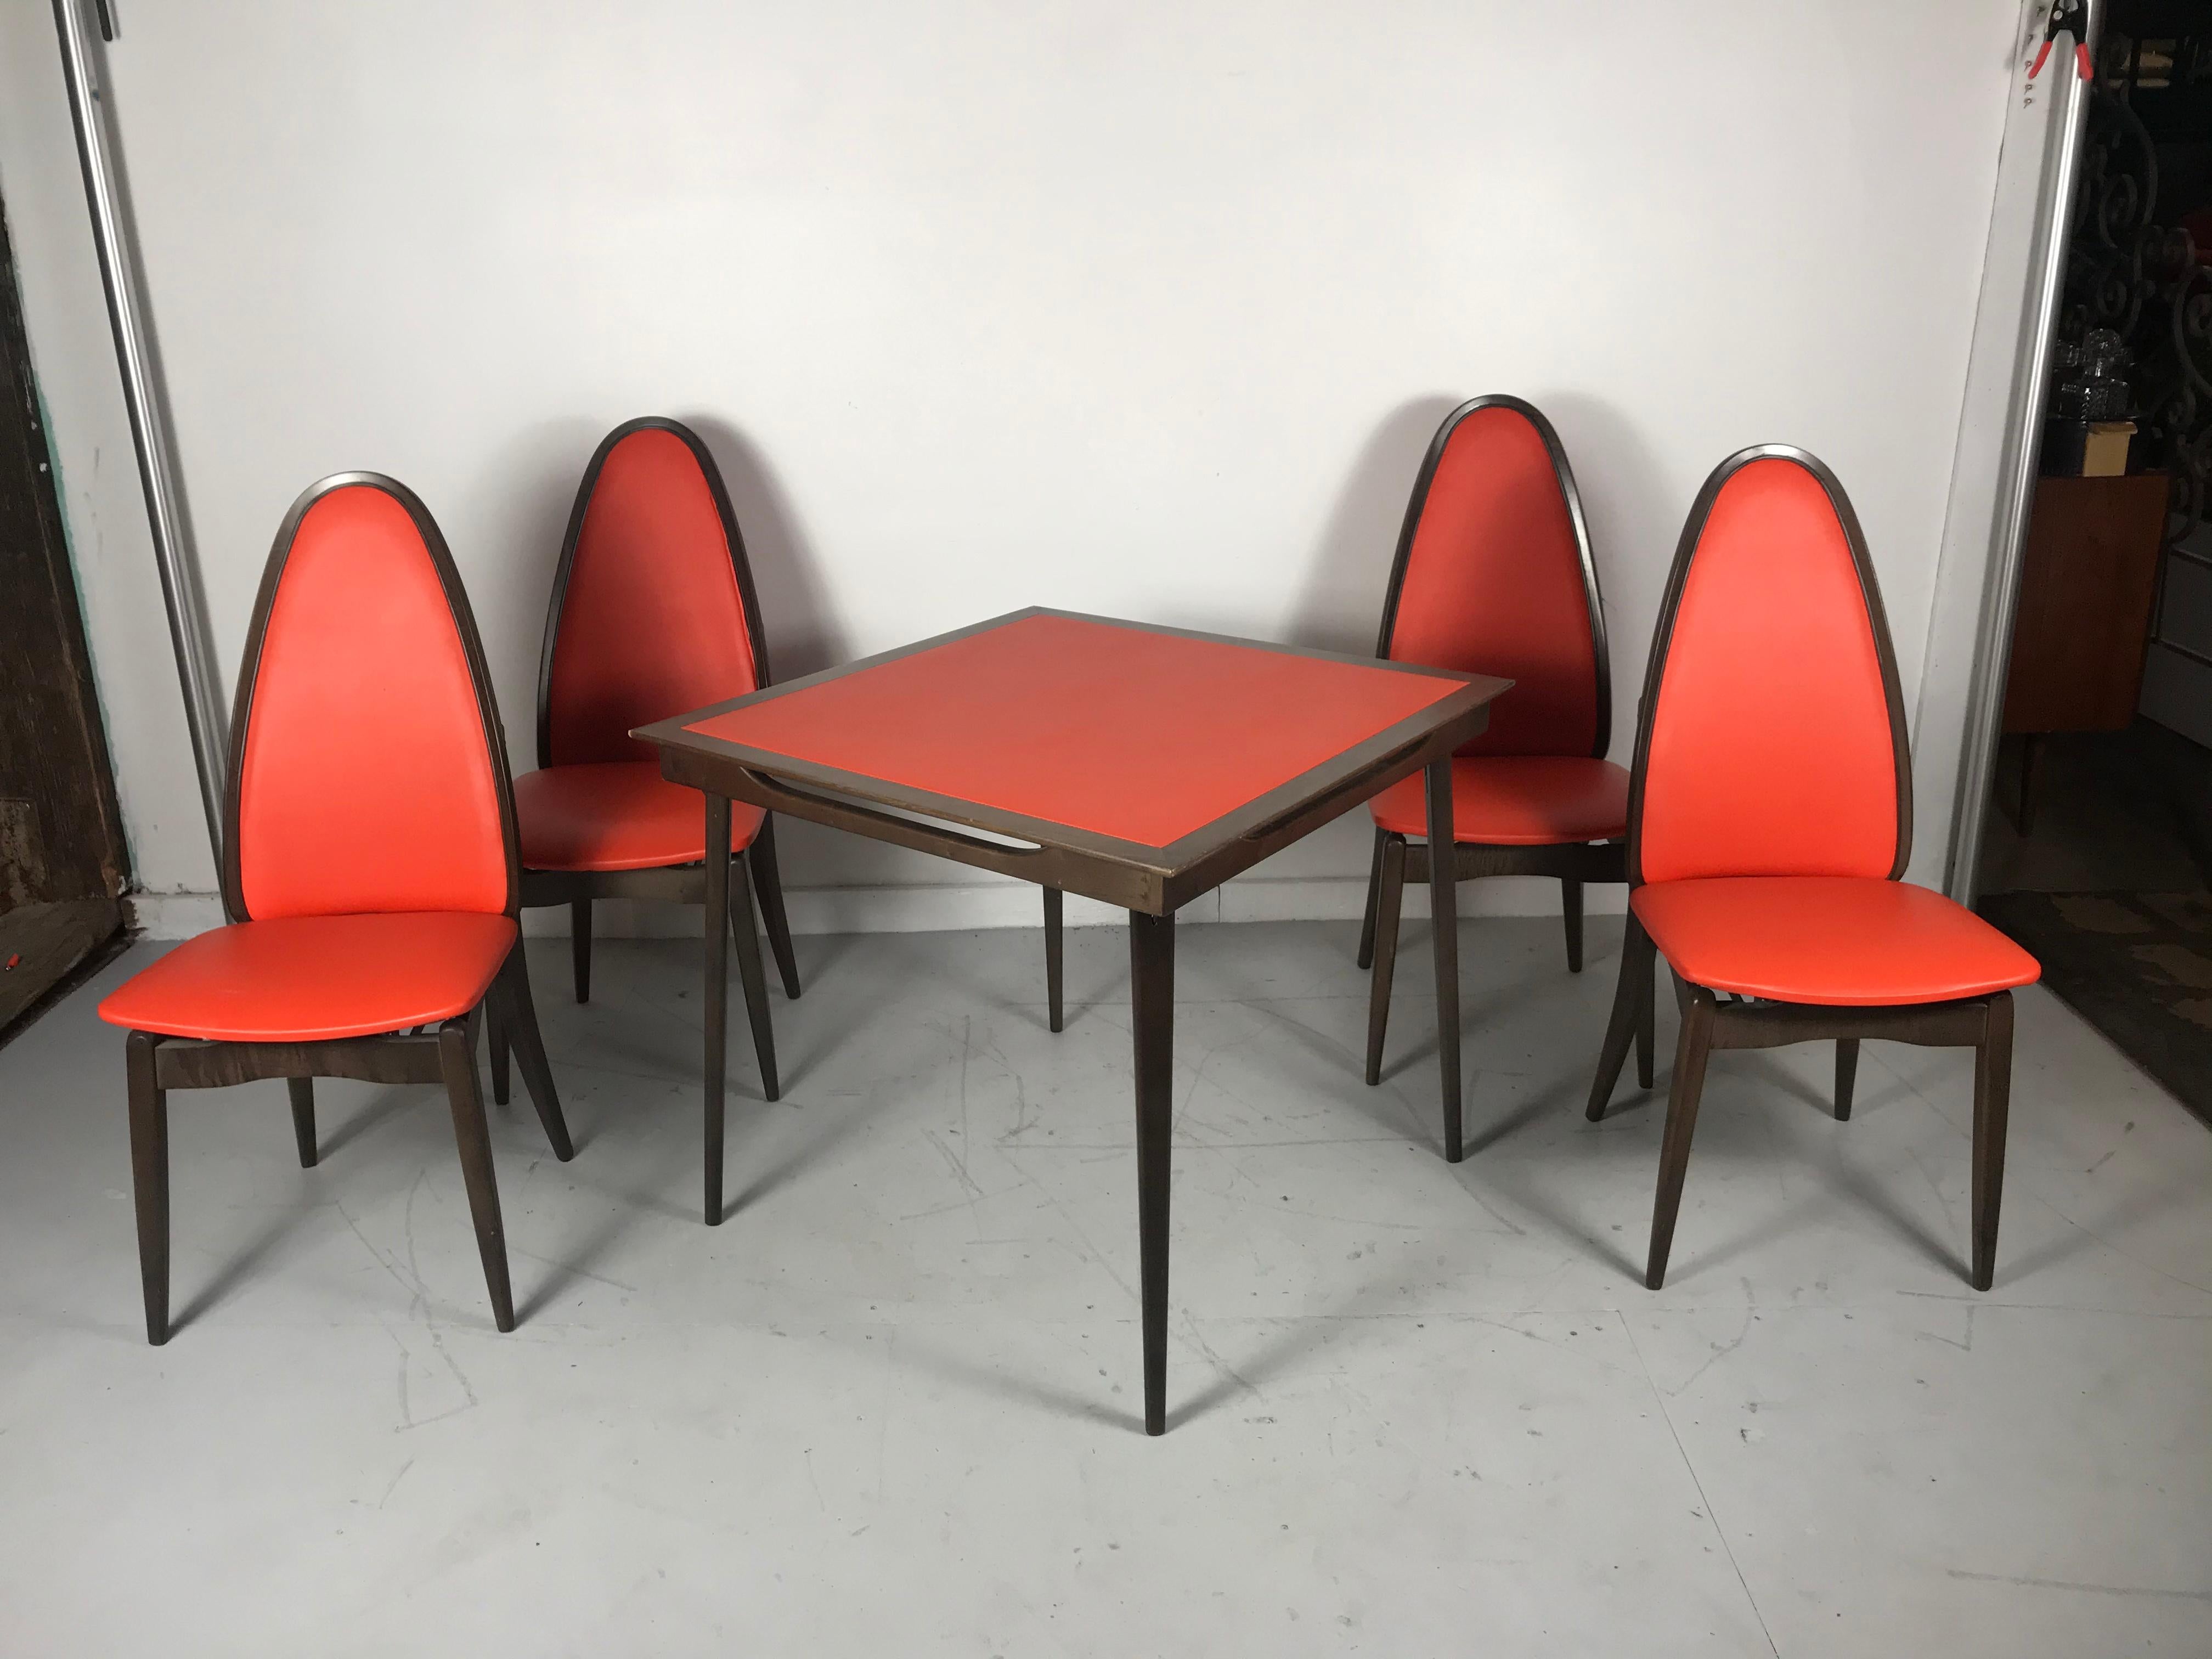 Mid-Century Modern Elegant Stylized Folding Table and Chairs Mfg. by Stakmore Furniture Co.